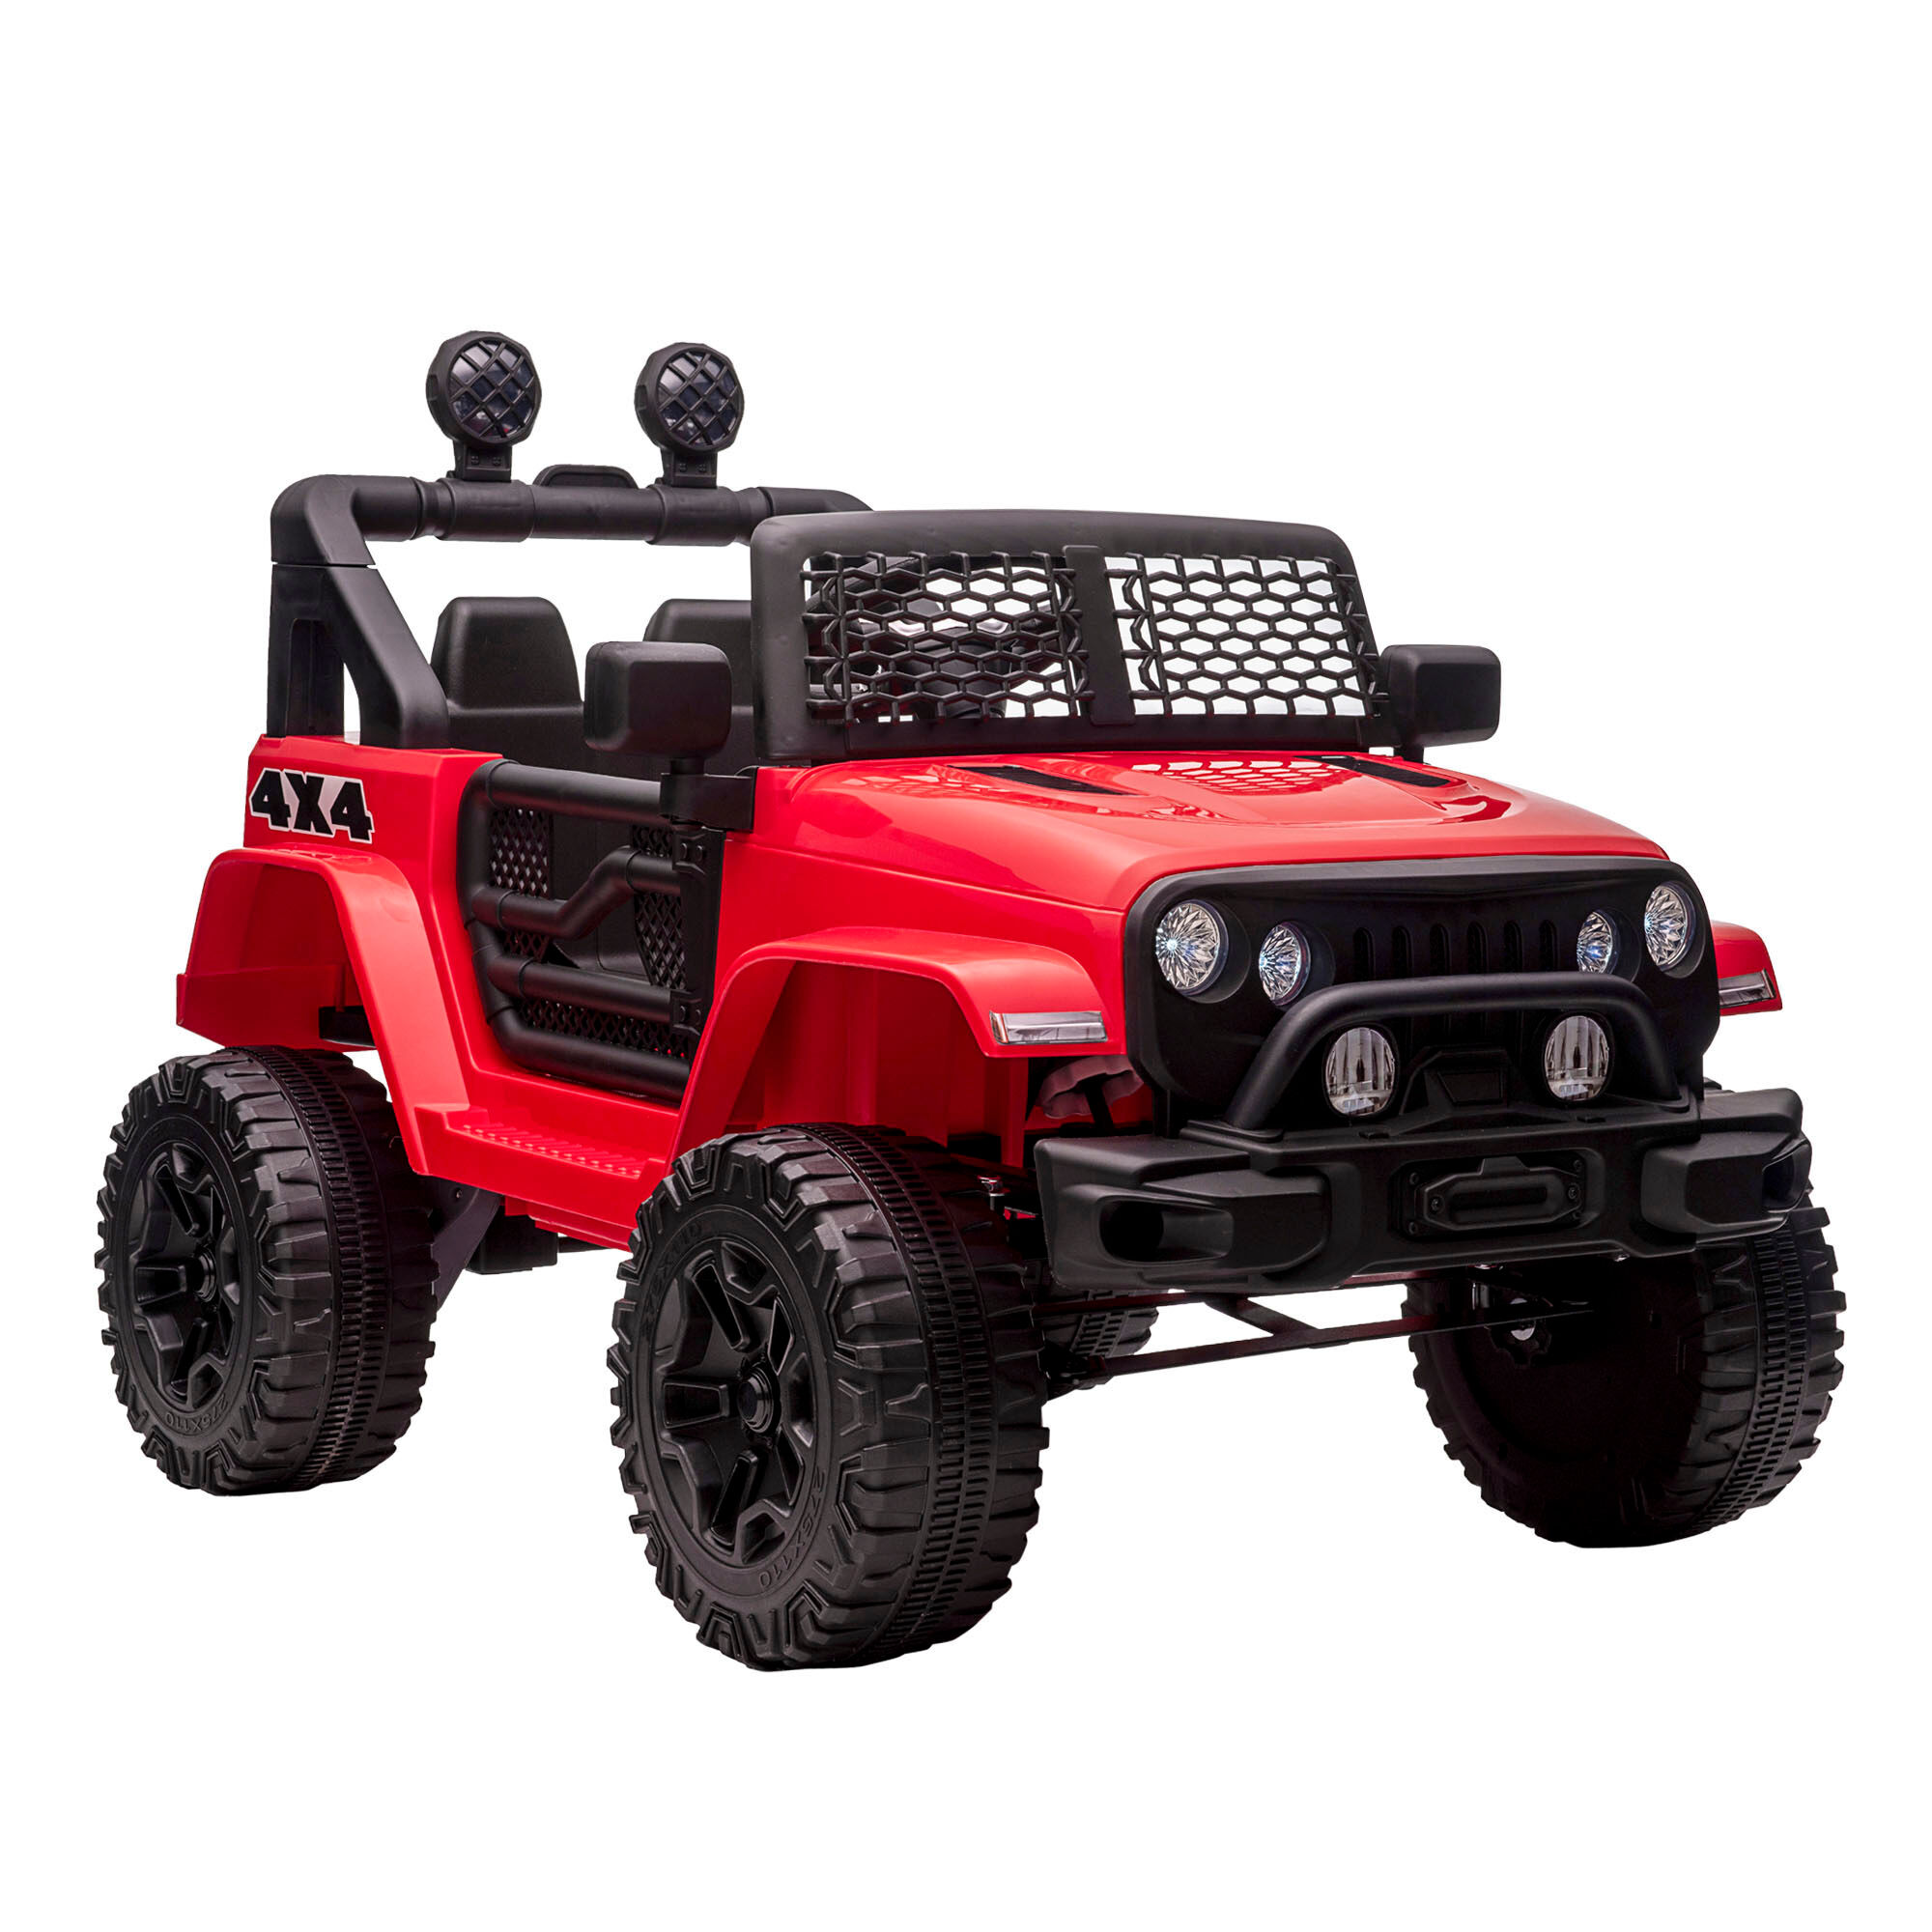 Aosom 12V Kids Ride On Car, Electric Battery Powered Off Road Truck Toy with Parent Remote Control, LED Lights, Horn & Adjustable Speed, Red